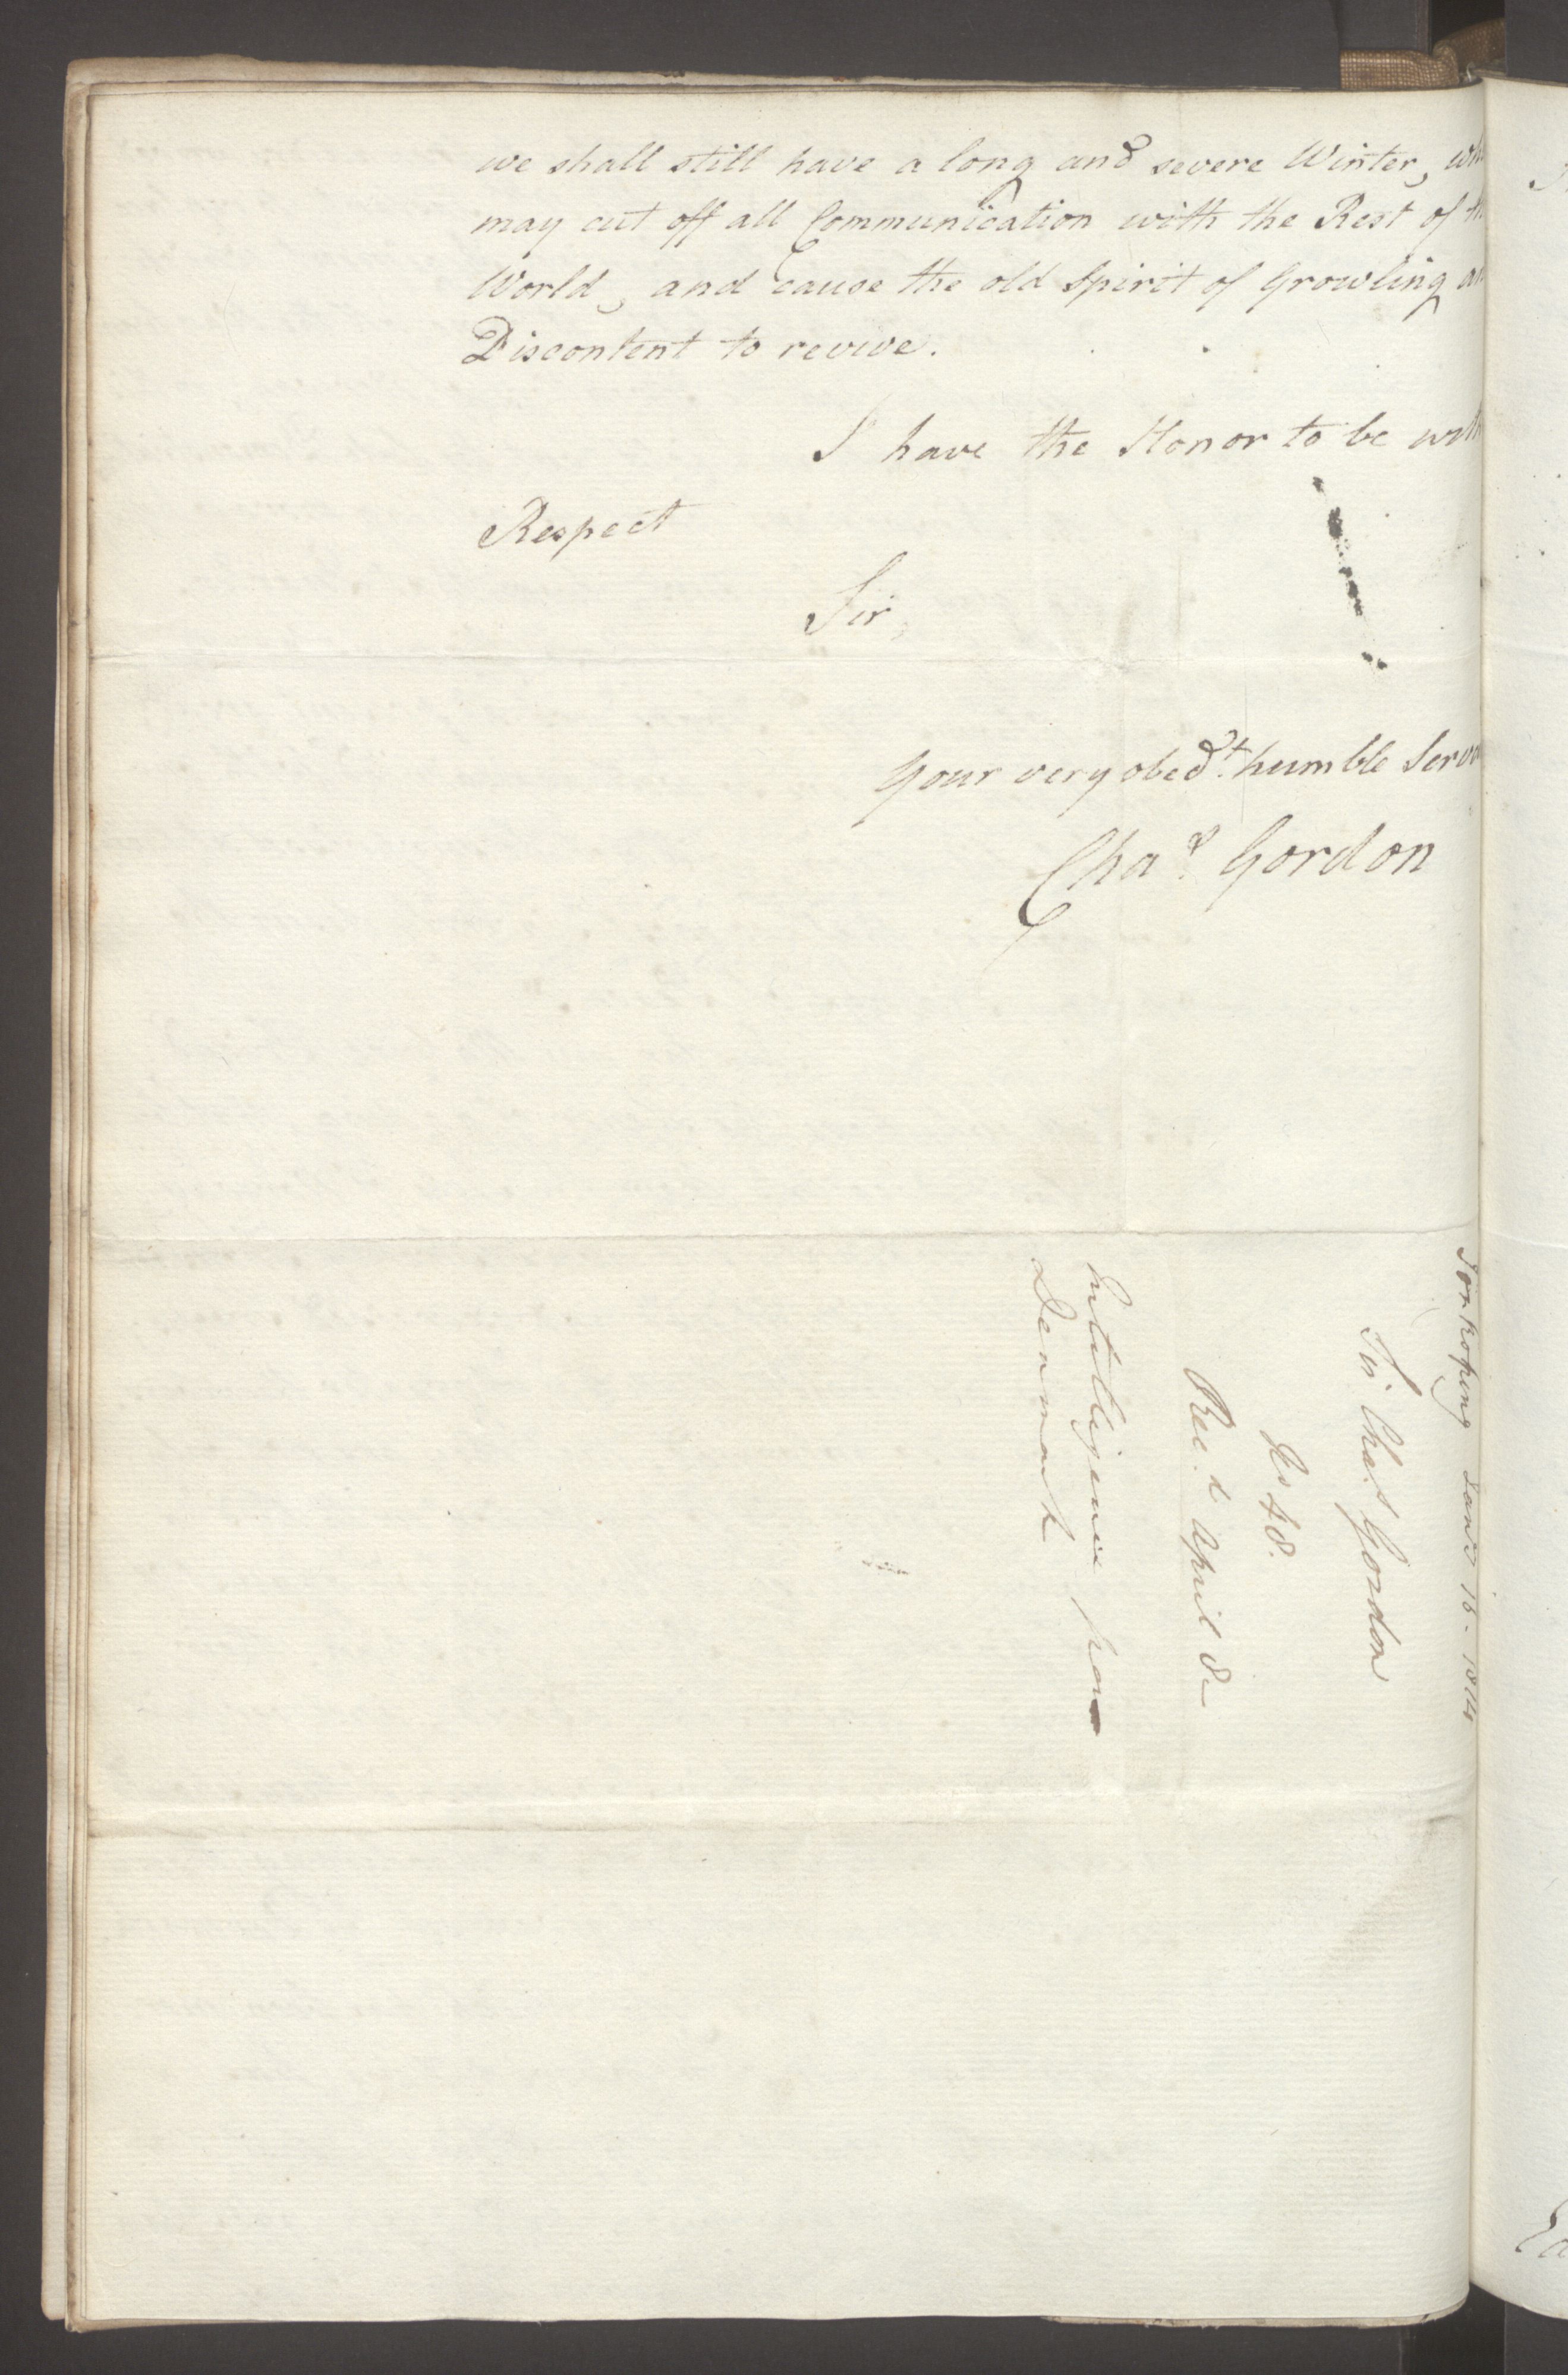 Foreign Office*, UKA/-/FO 38/16: Sir C. Gordon. Reports from Malmö, Jonkoping, and Helsingborg, 1814, s. 10